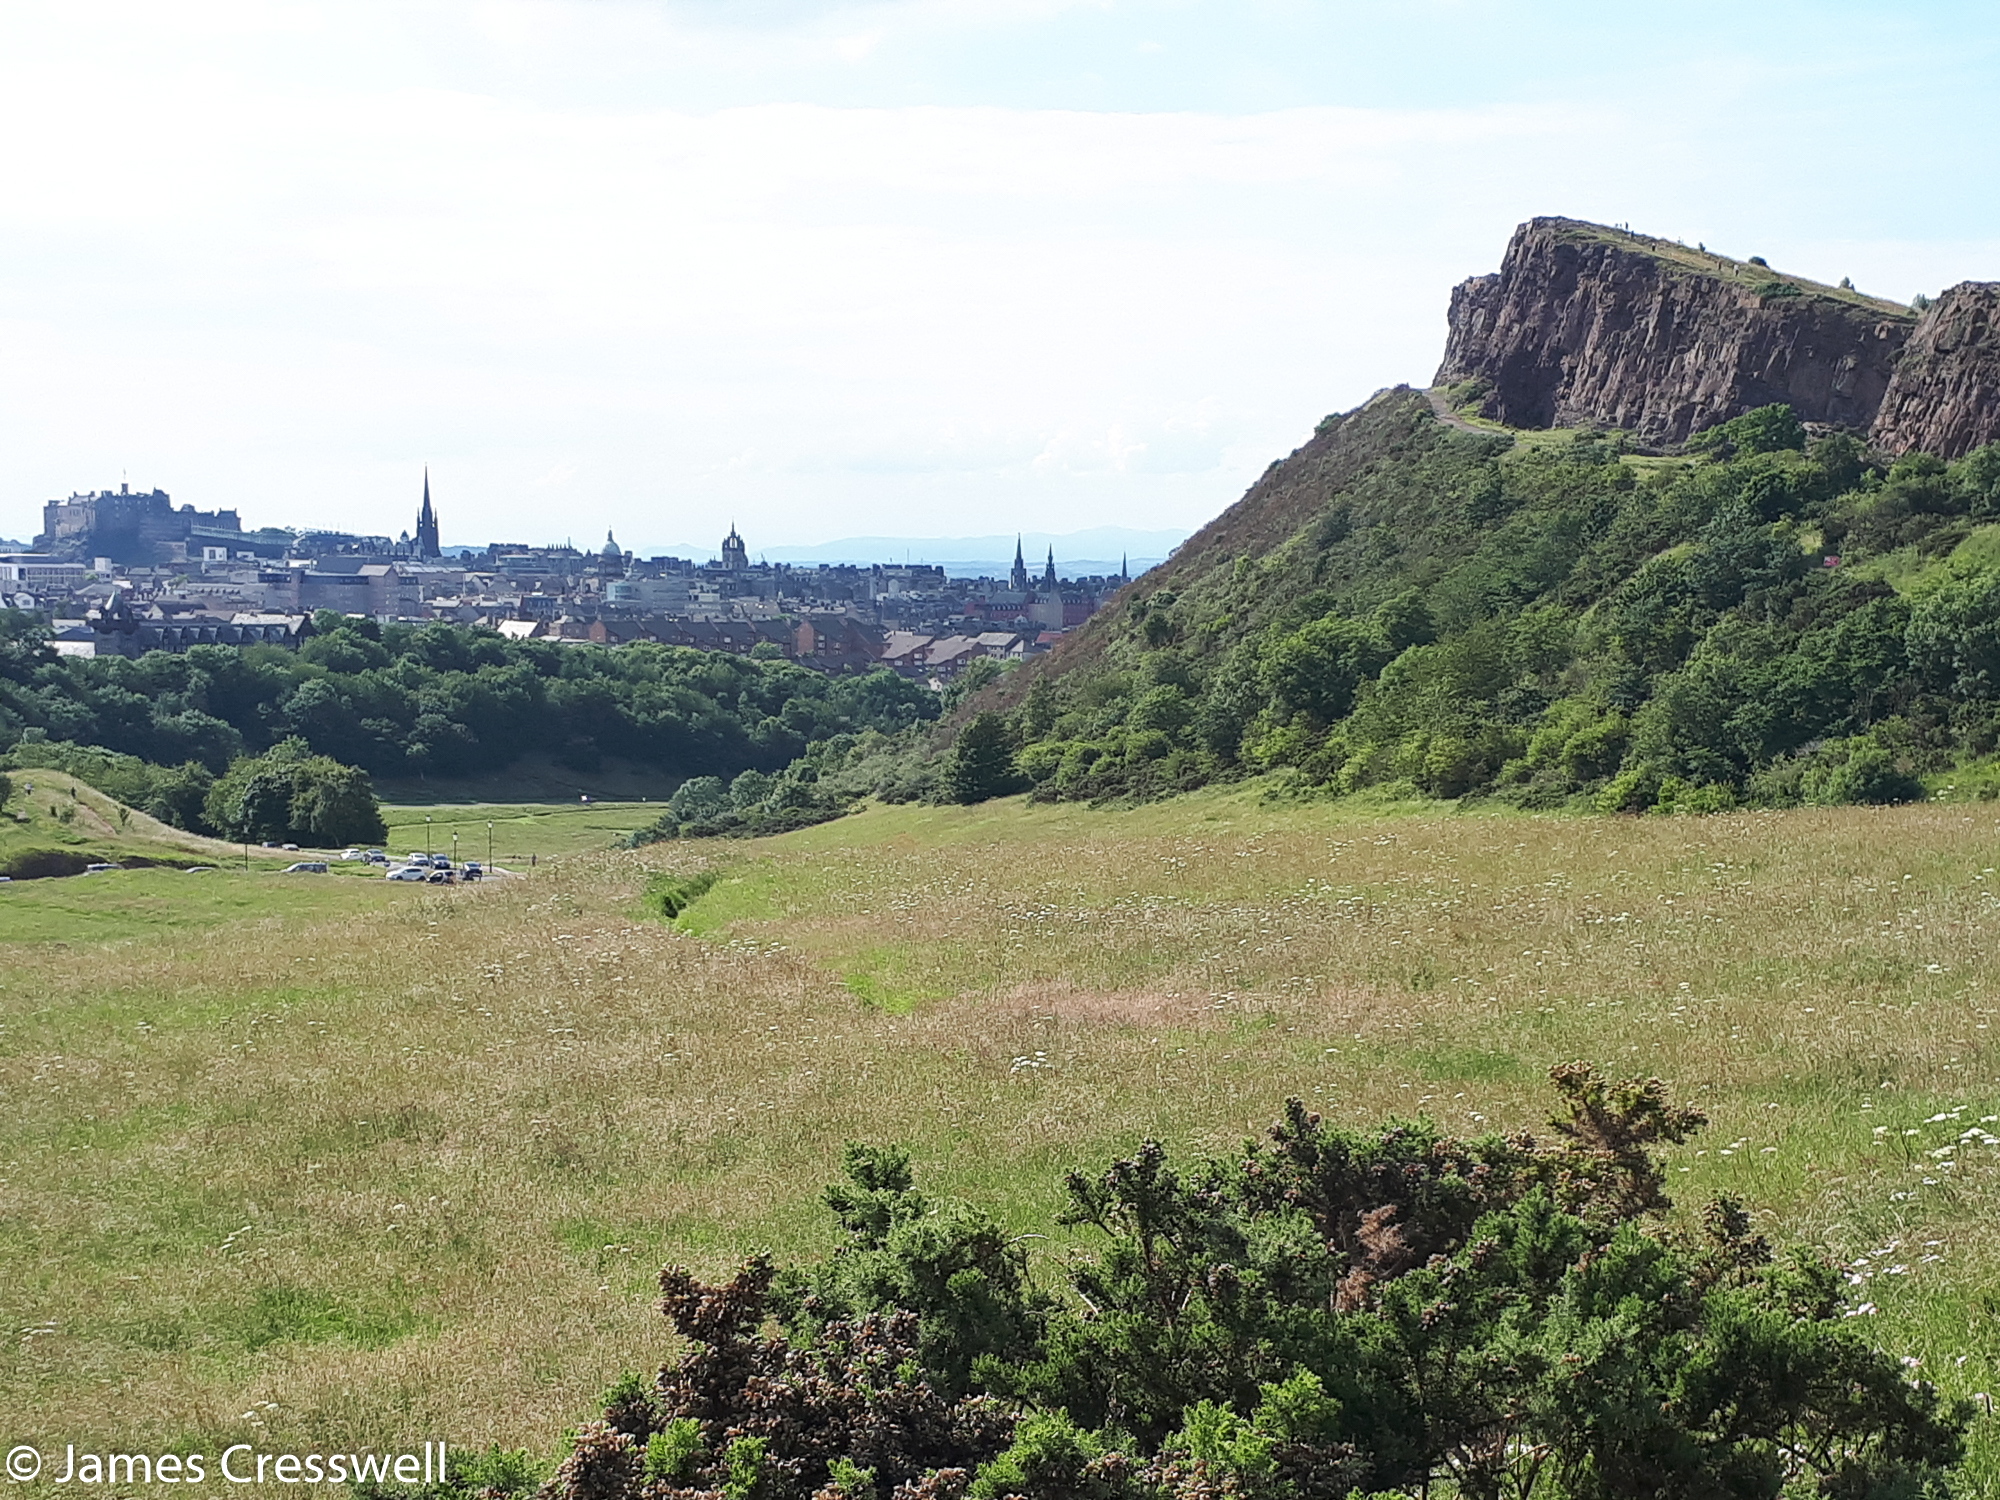 A photograph of small rock cliffs, Salisbury Crags, with the city of Edinburgh in the background, Holyrood Park, taken on a GeoWorld Travel Scotland geology trip, tour and holiday Edinburgh